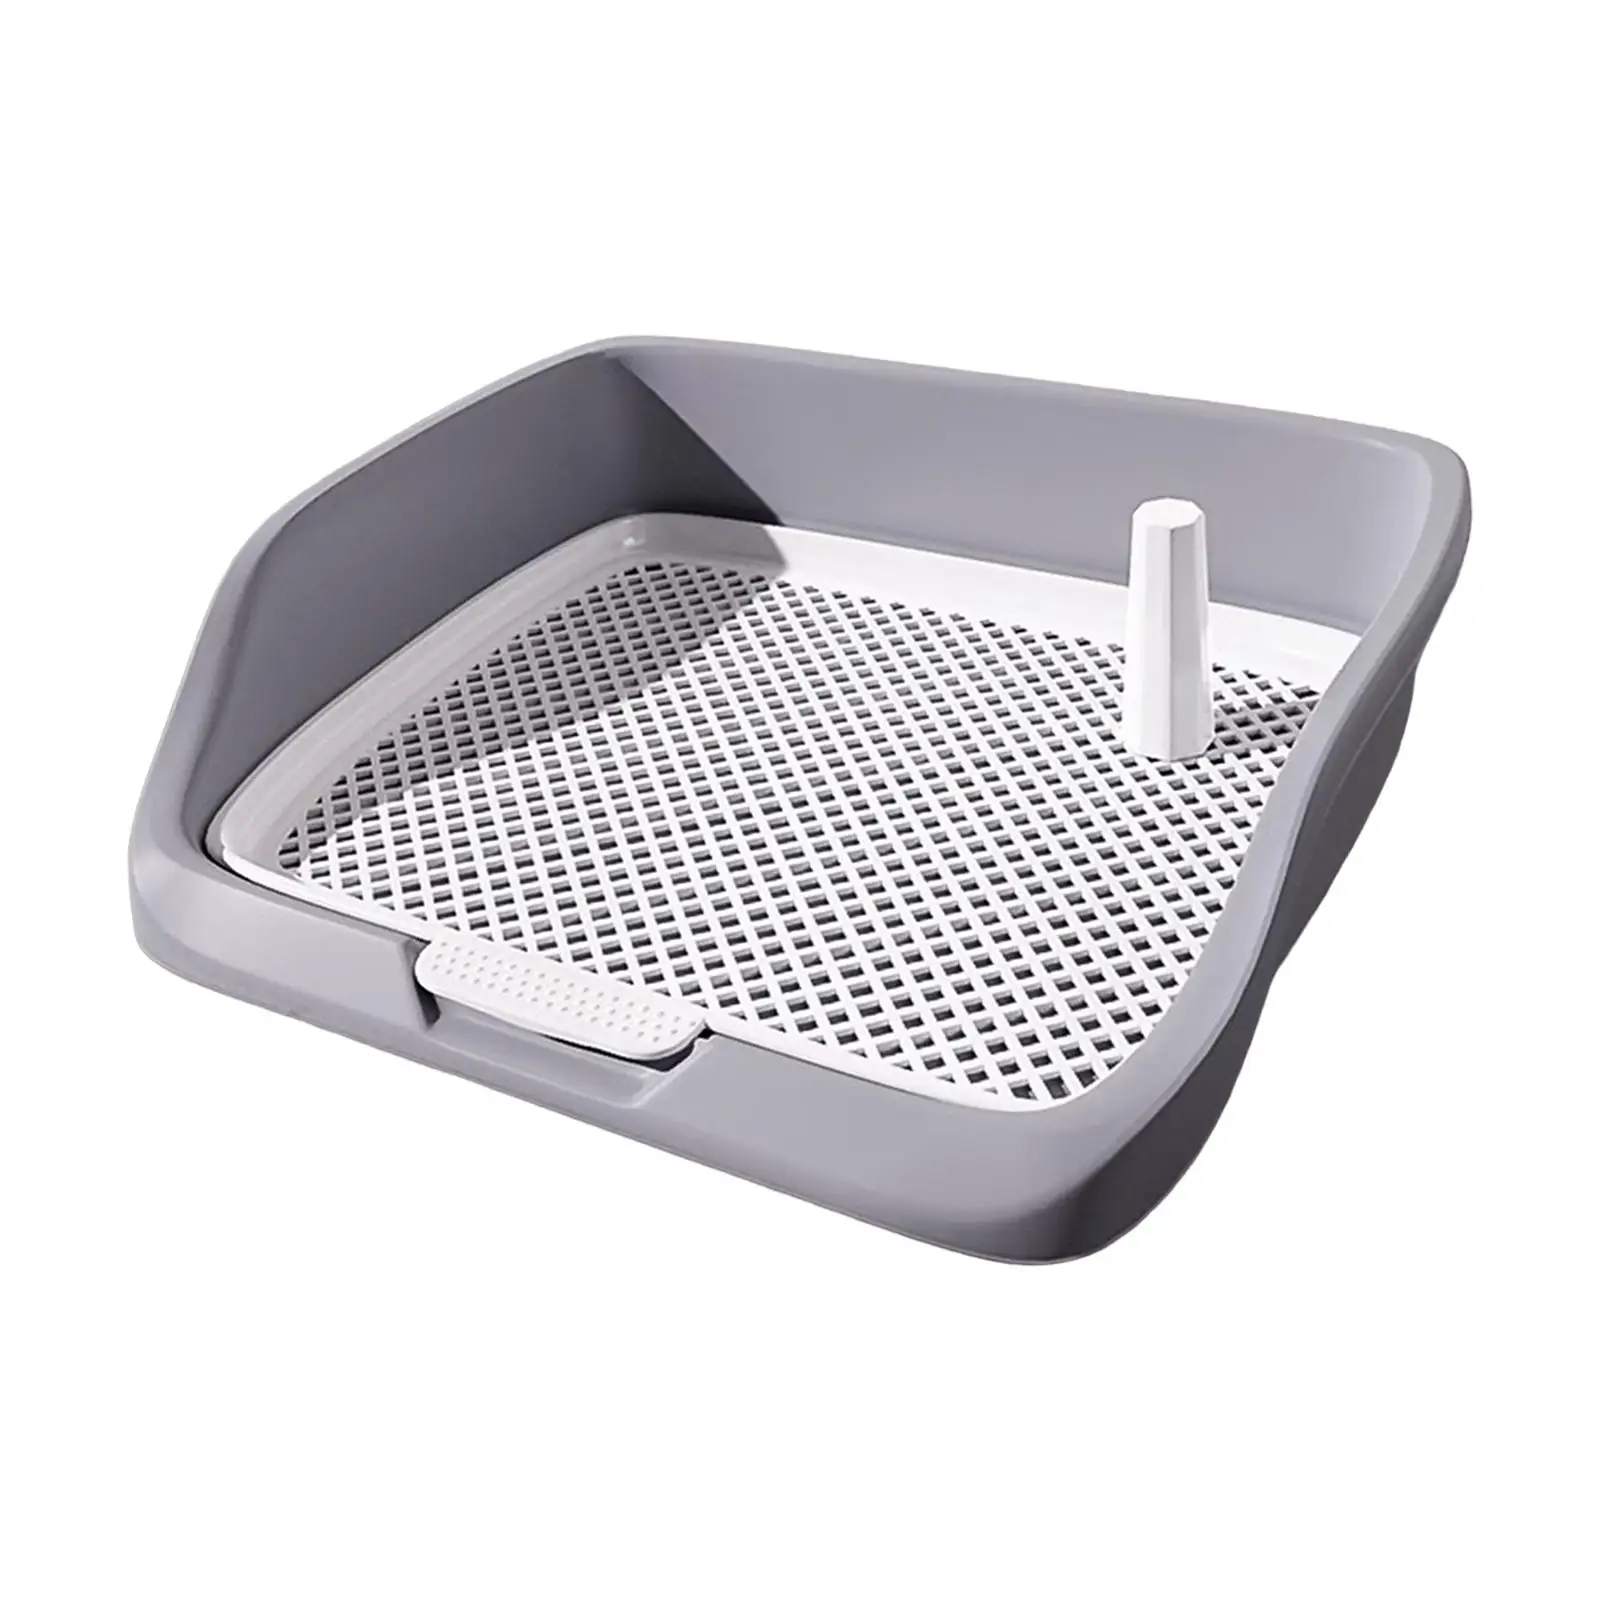 Pet Dog Toilet Puppy Potty Tray Indoor Outdoor for Cat Portable Dog Potty Pan Litter Pan Litter Box Indoor Potty Tray